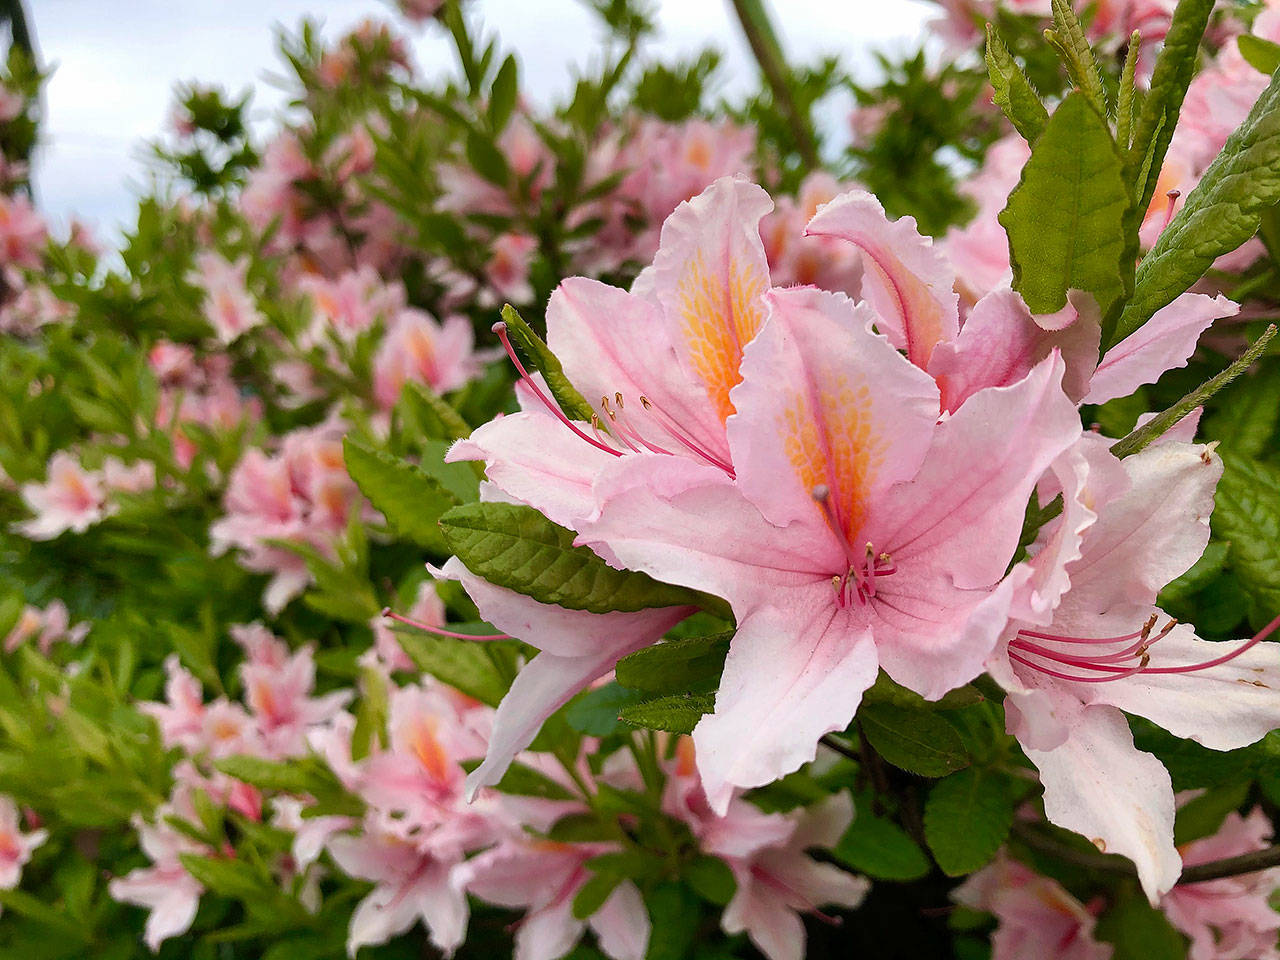 “Irene Koster” azalea. Now is the time to buy these plants, when they are in full bloom.